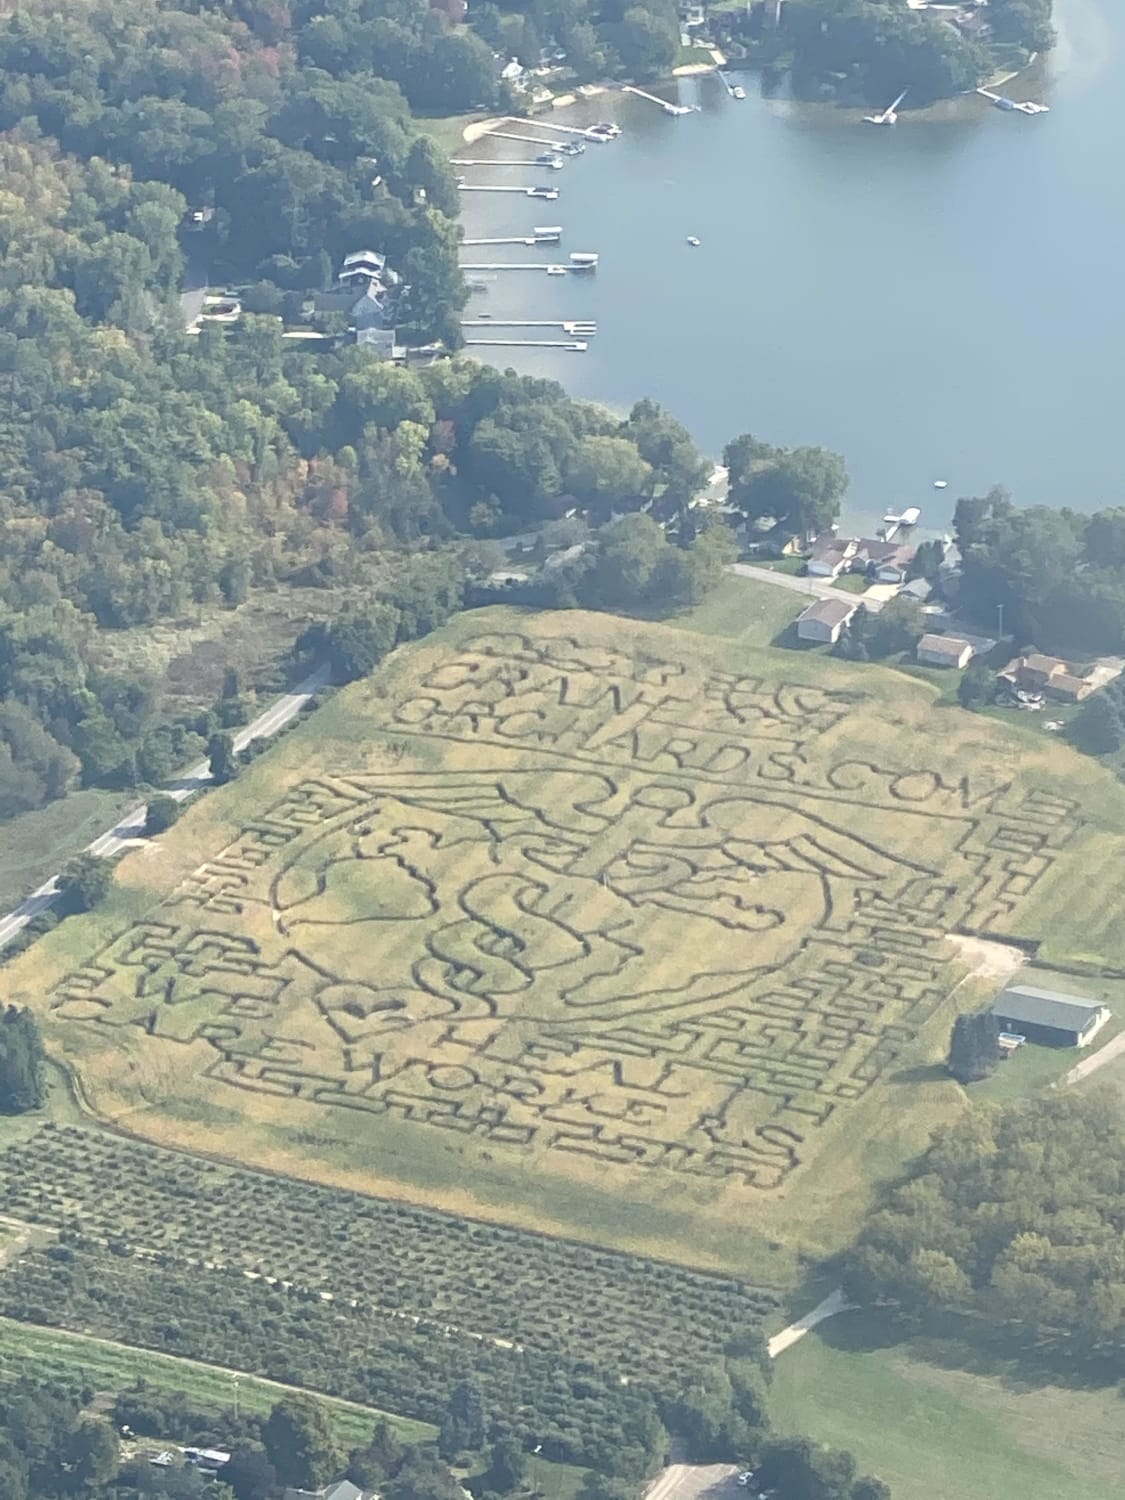 Local orchard’s corn maze from above